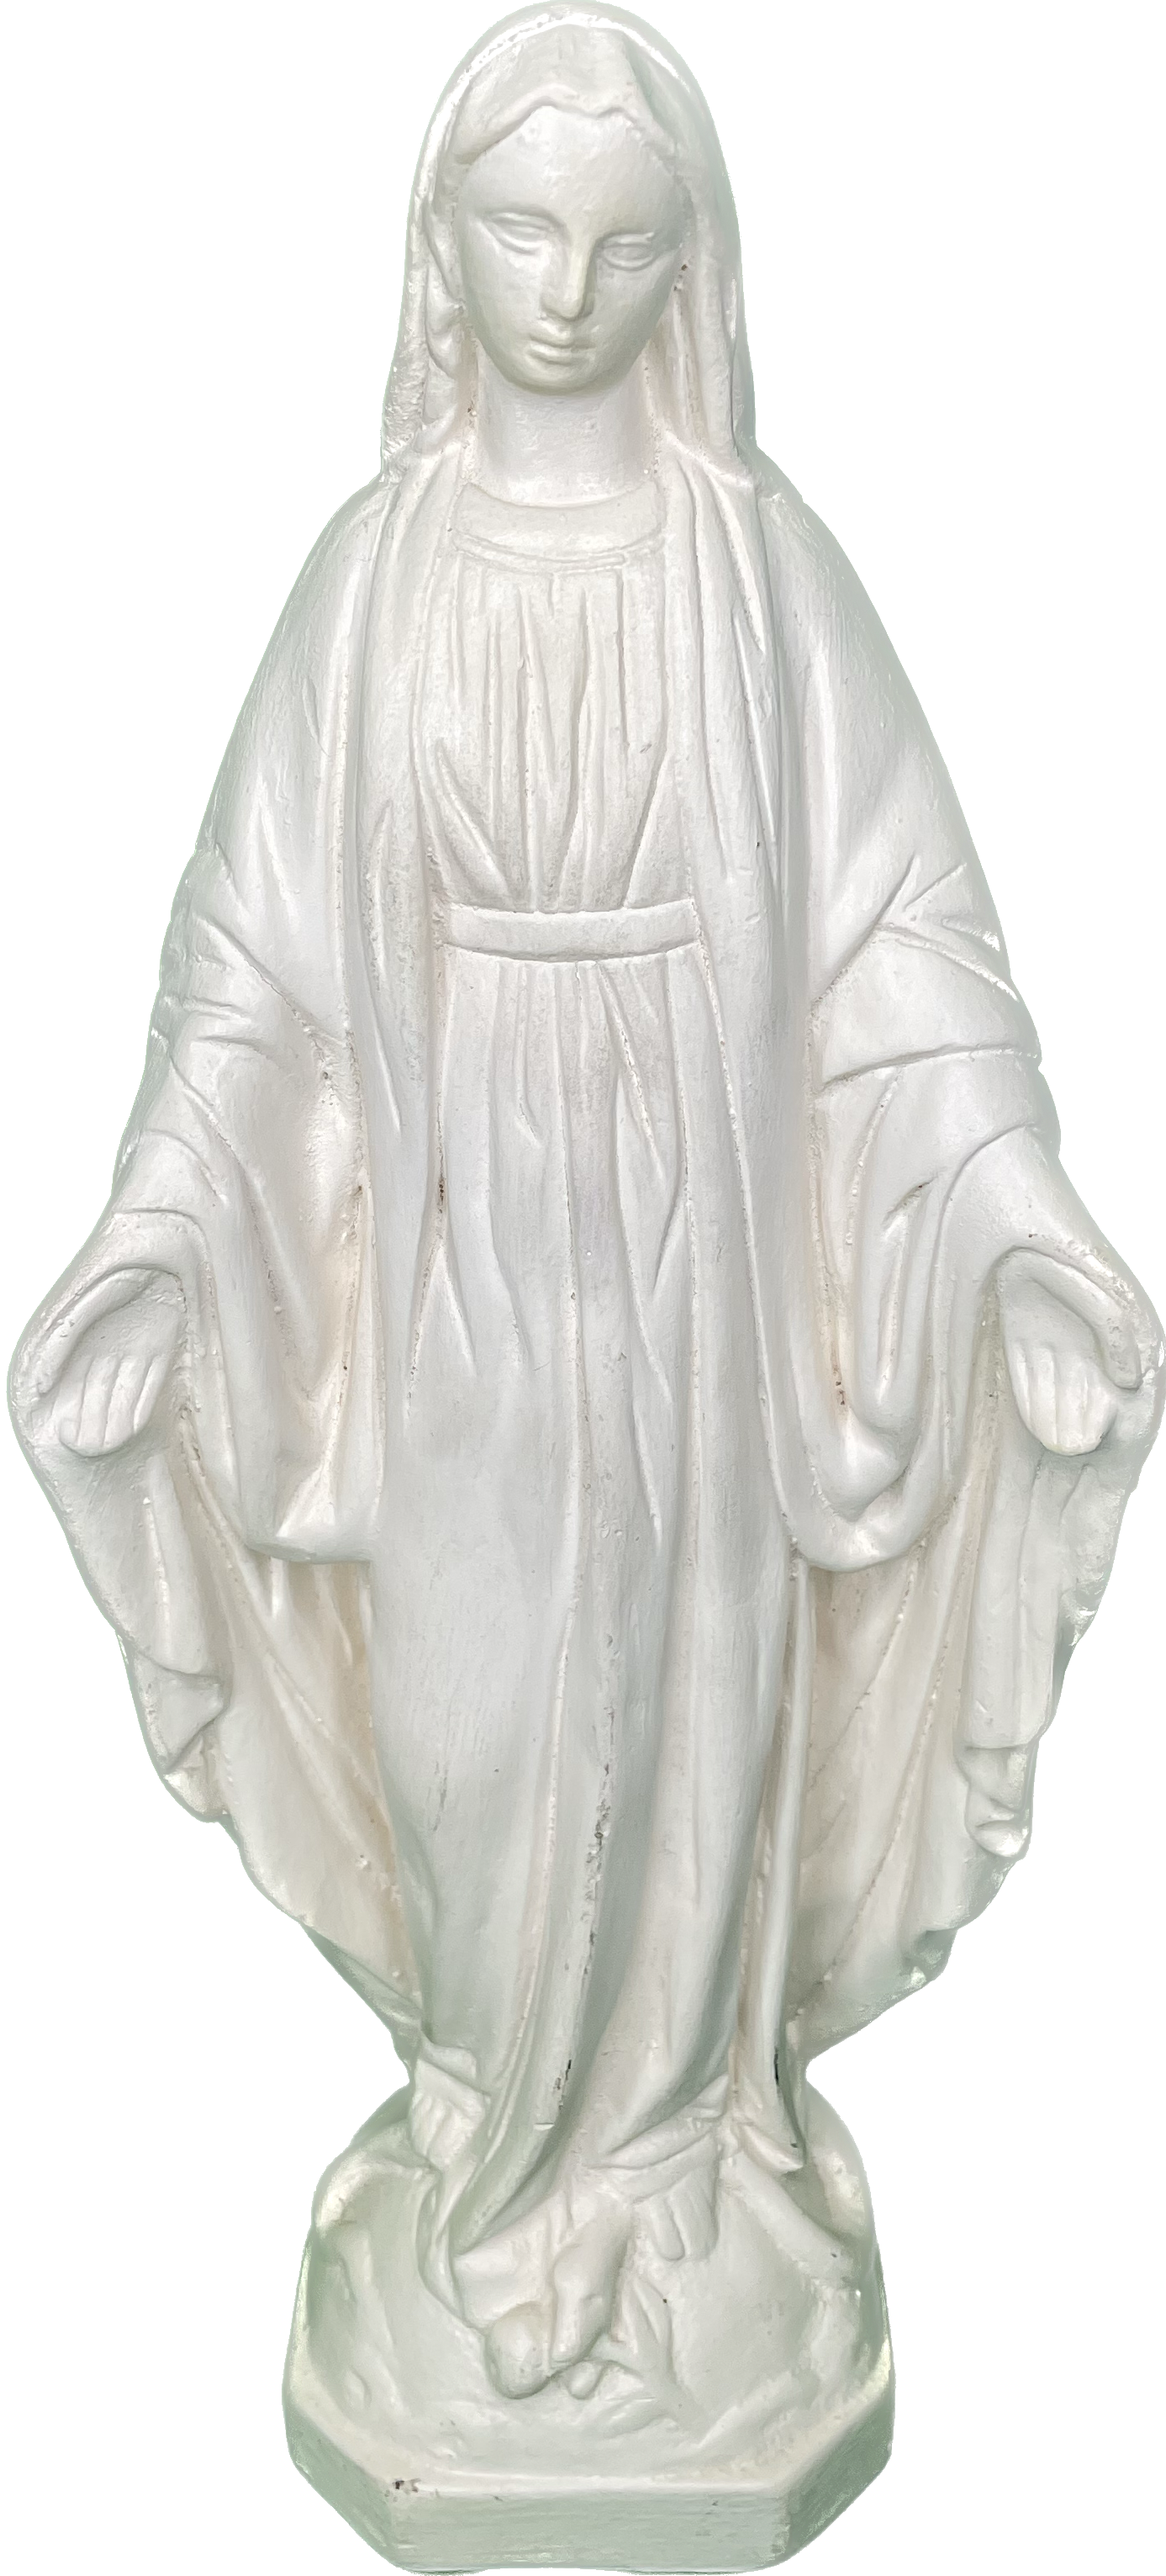 Vintage 12.5” Mother Mary Chalkware Religious Statue